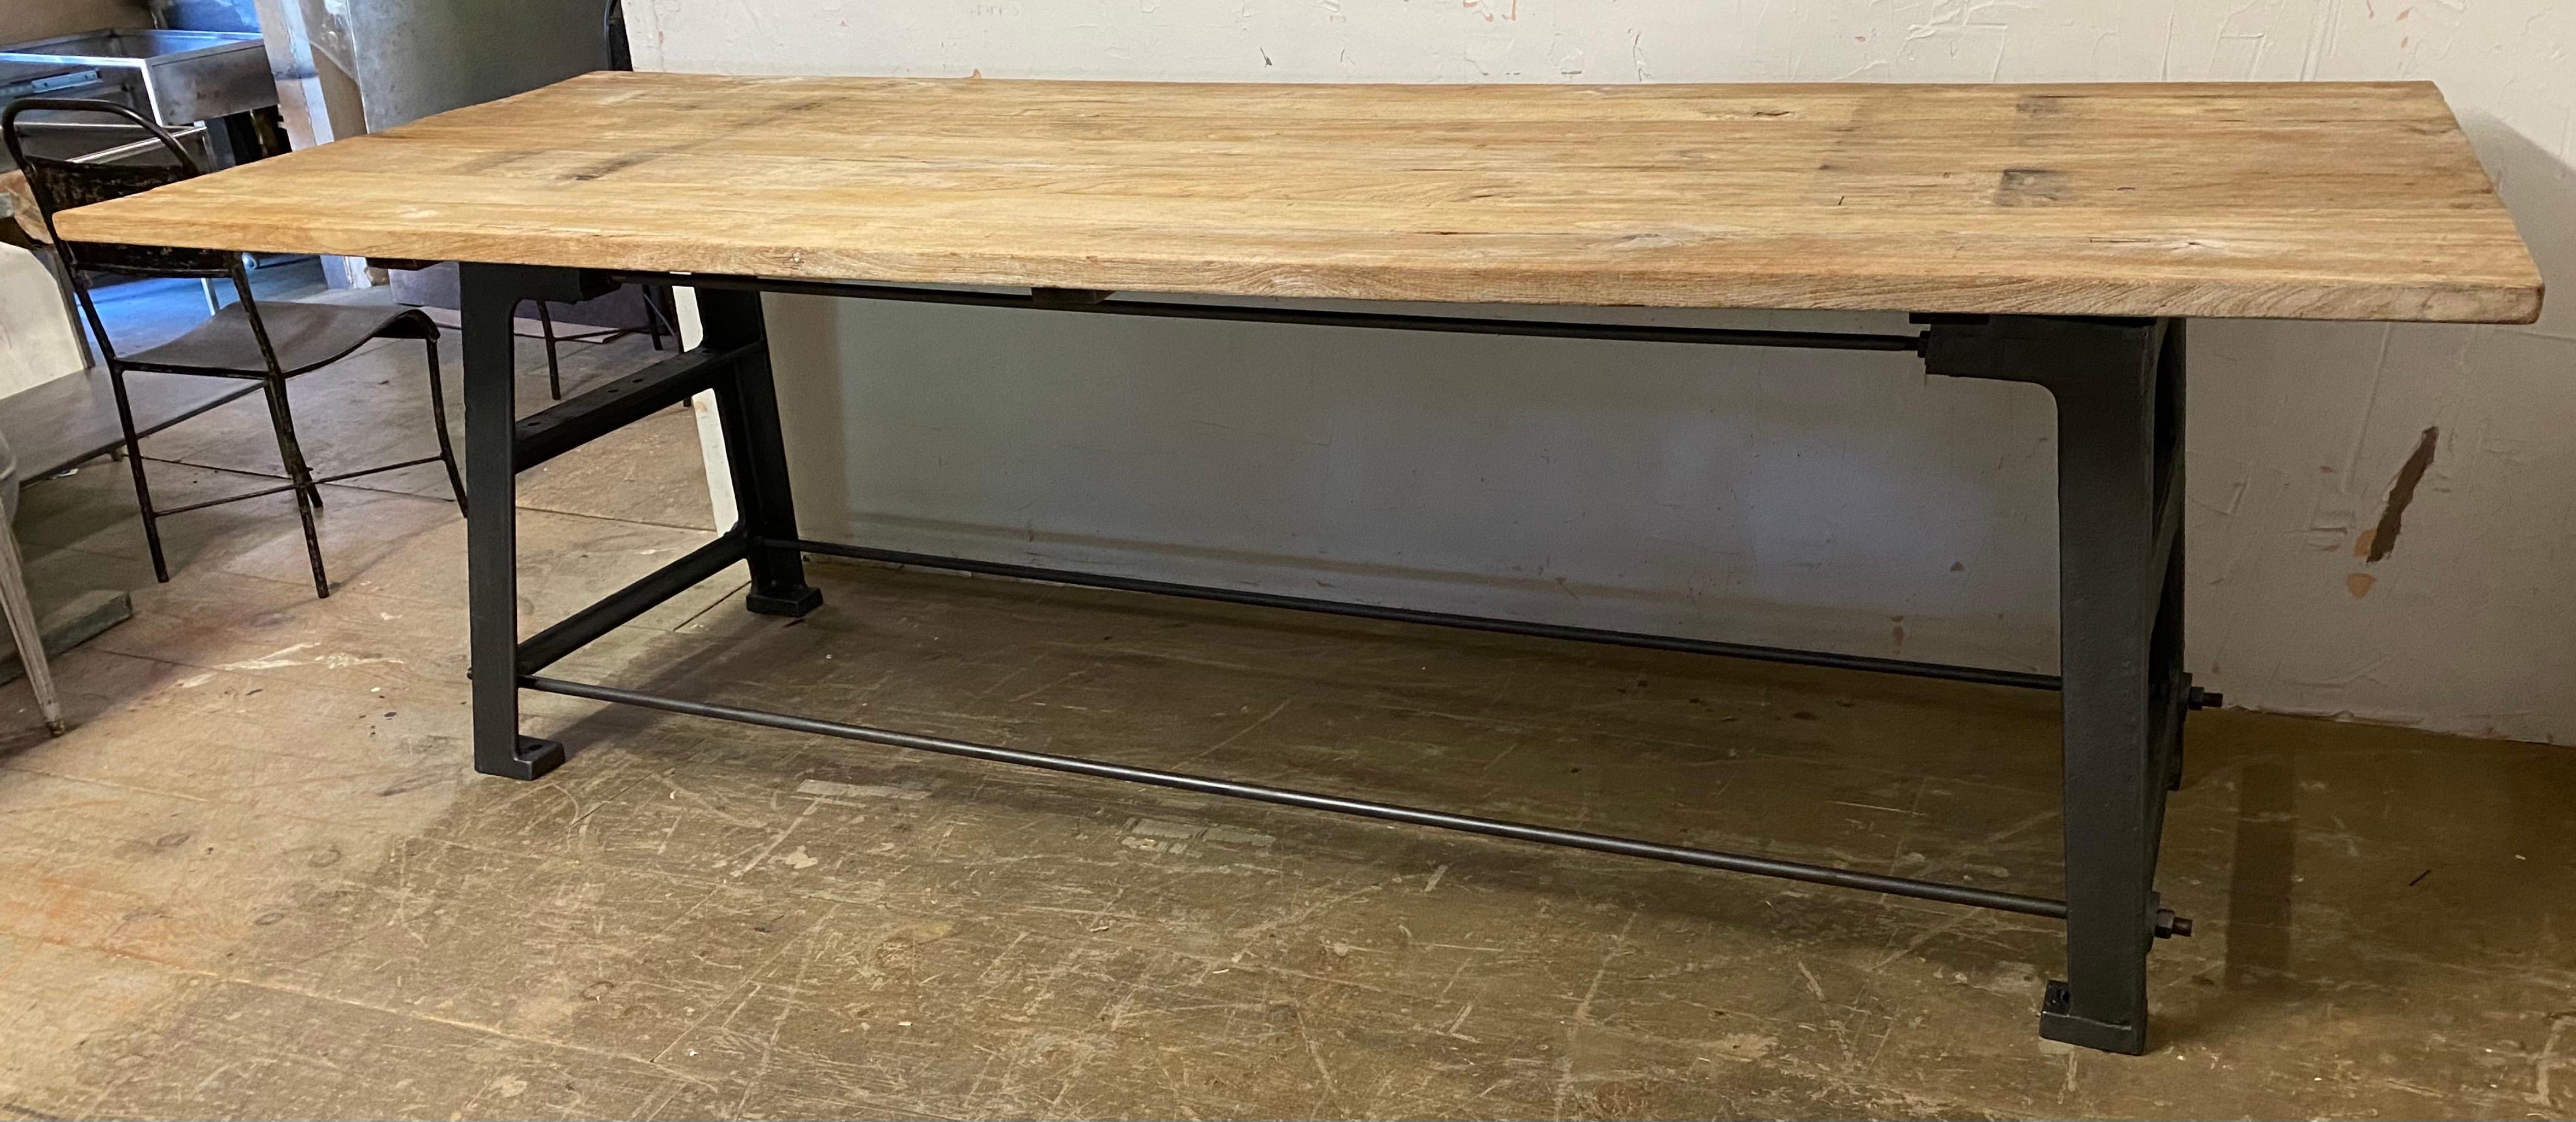 Iron Large Industrial Worktable or Kitchen Island For Sale